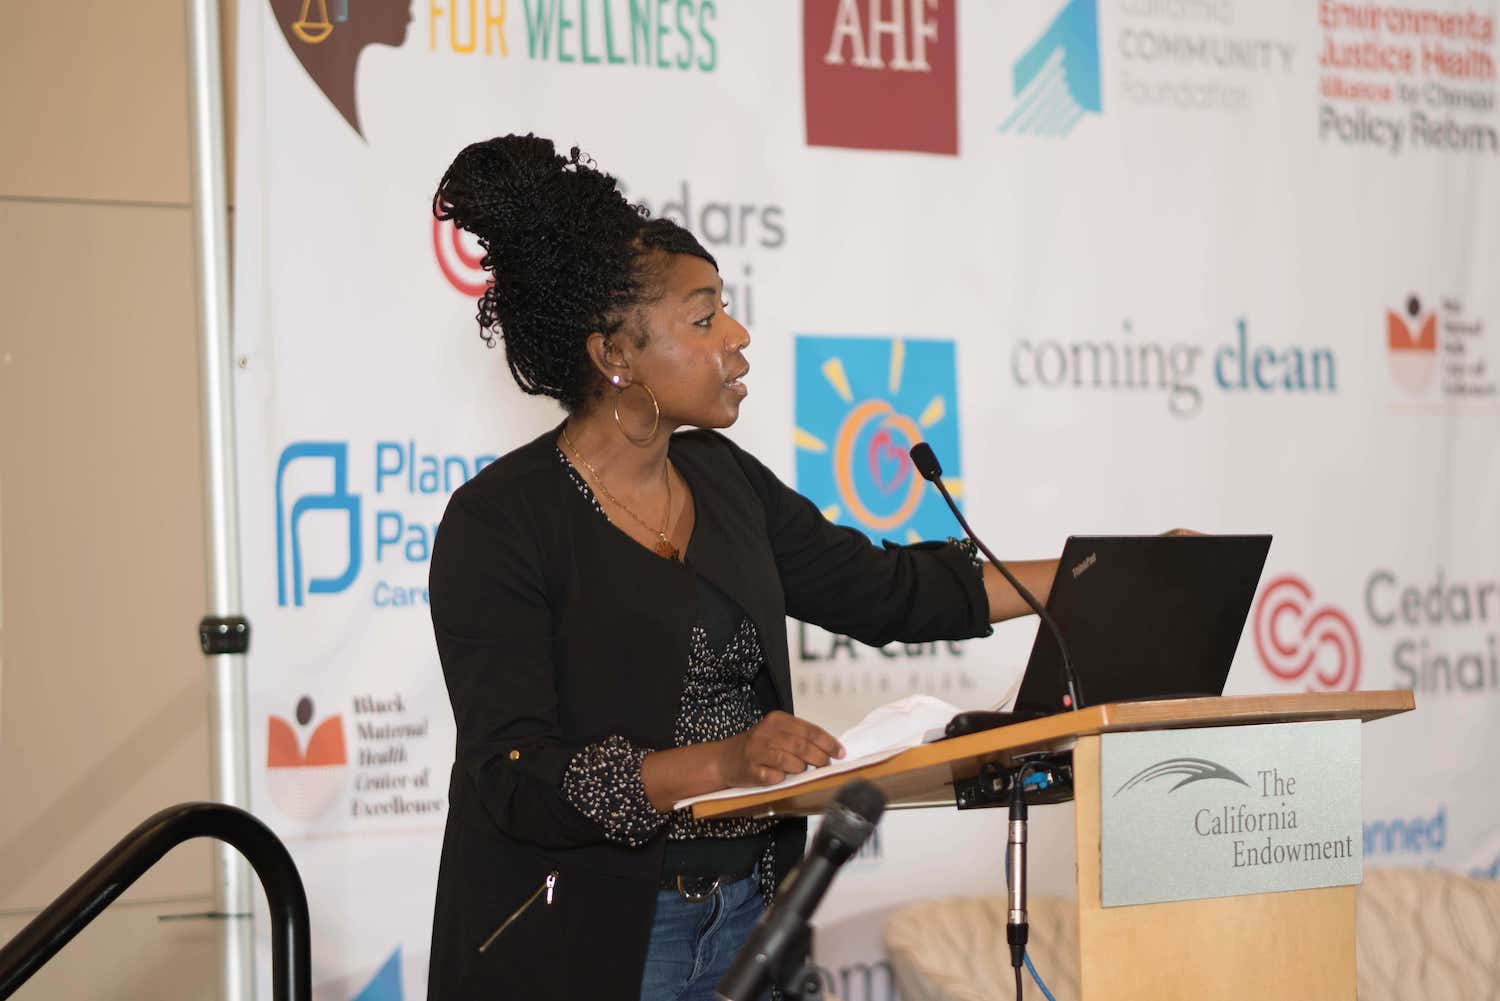 Black Women for Wellness 2023 Reproductive Justice Conference 50